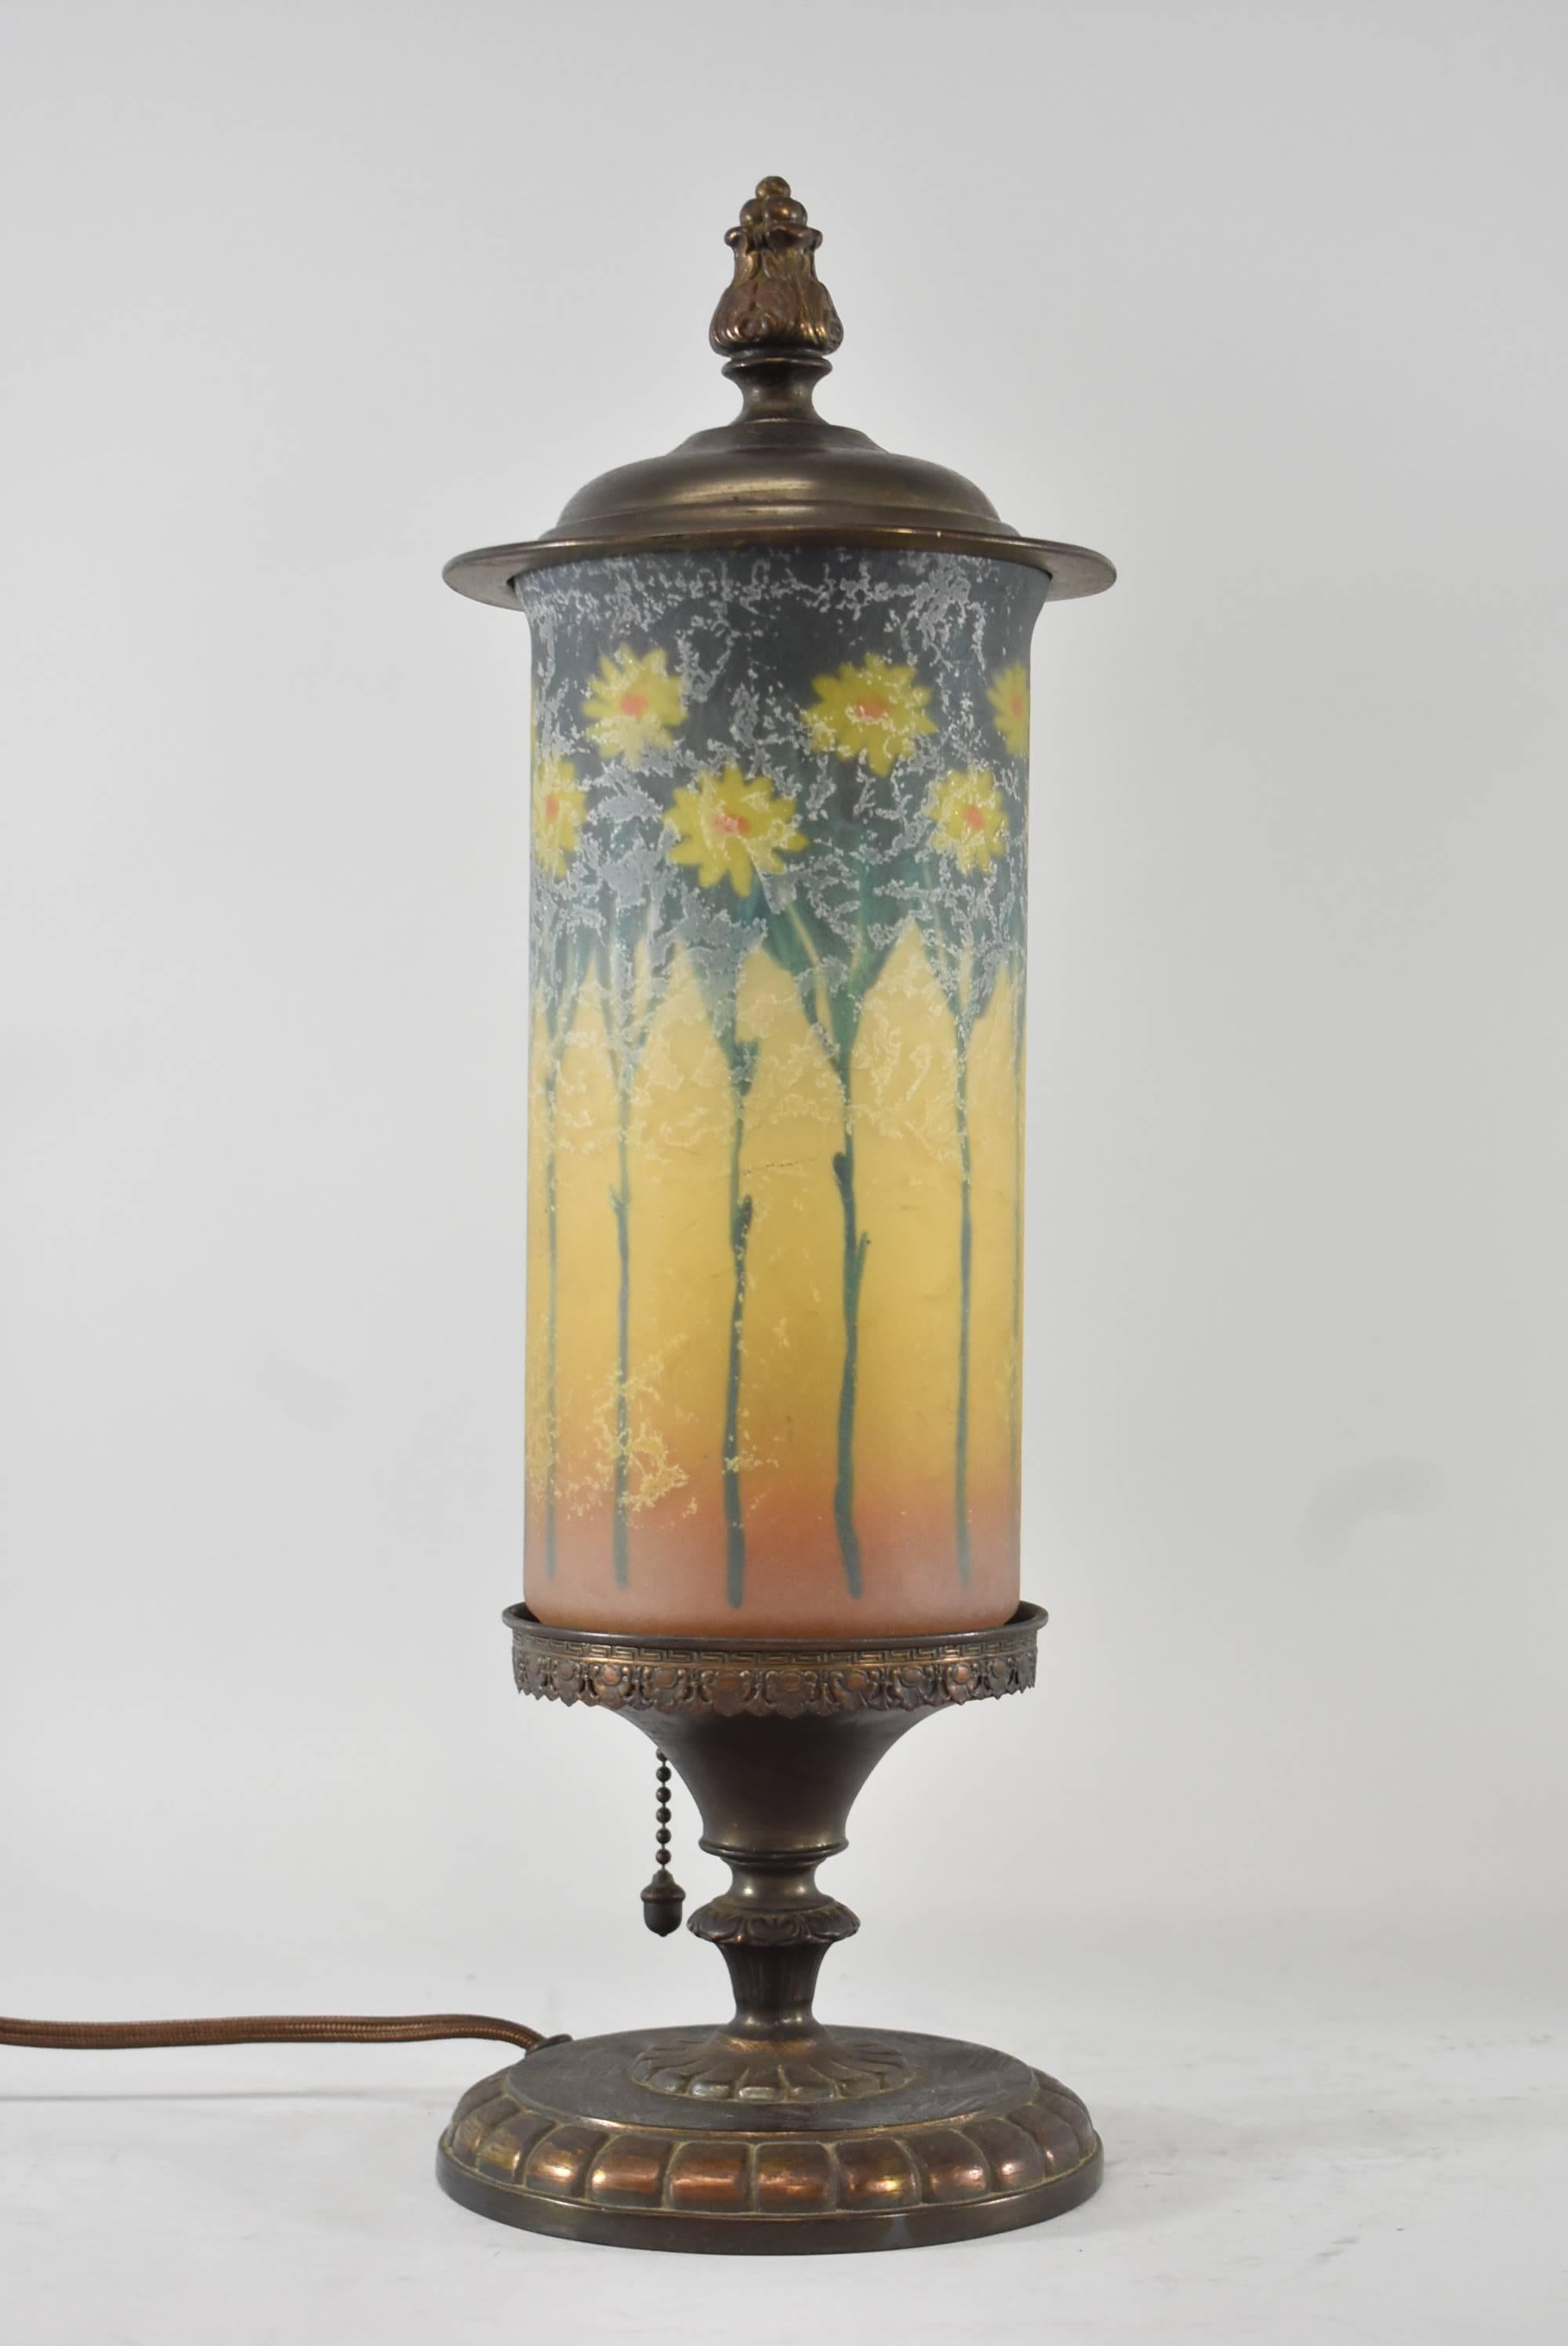 A beautiful pair of reverse painted mantel lamps by Handel. The shades feature alternating tall and short flowers, yellow with an orange center and a textured finish. They are signed Handel 699AC.